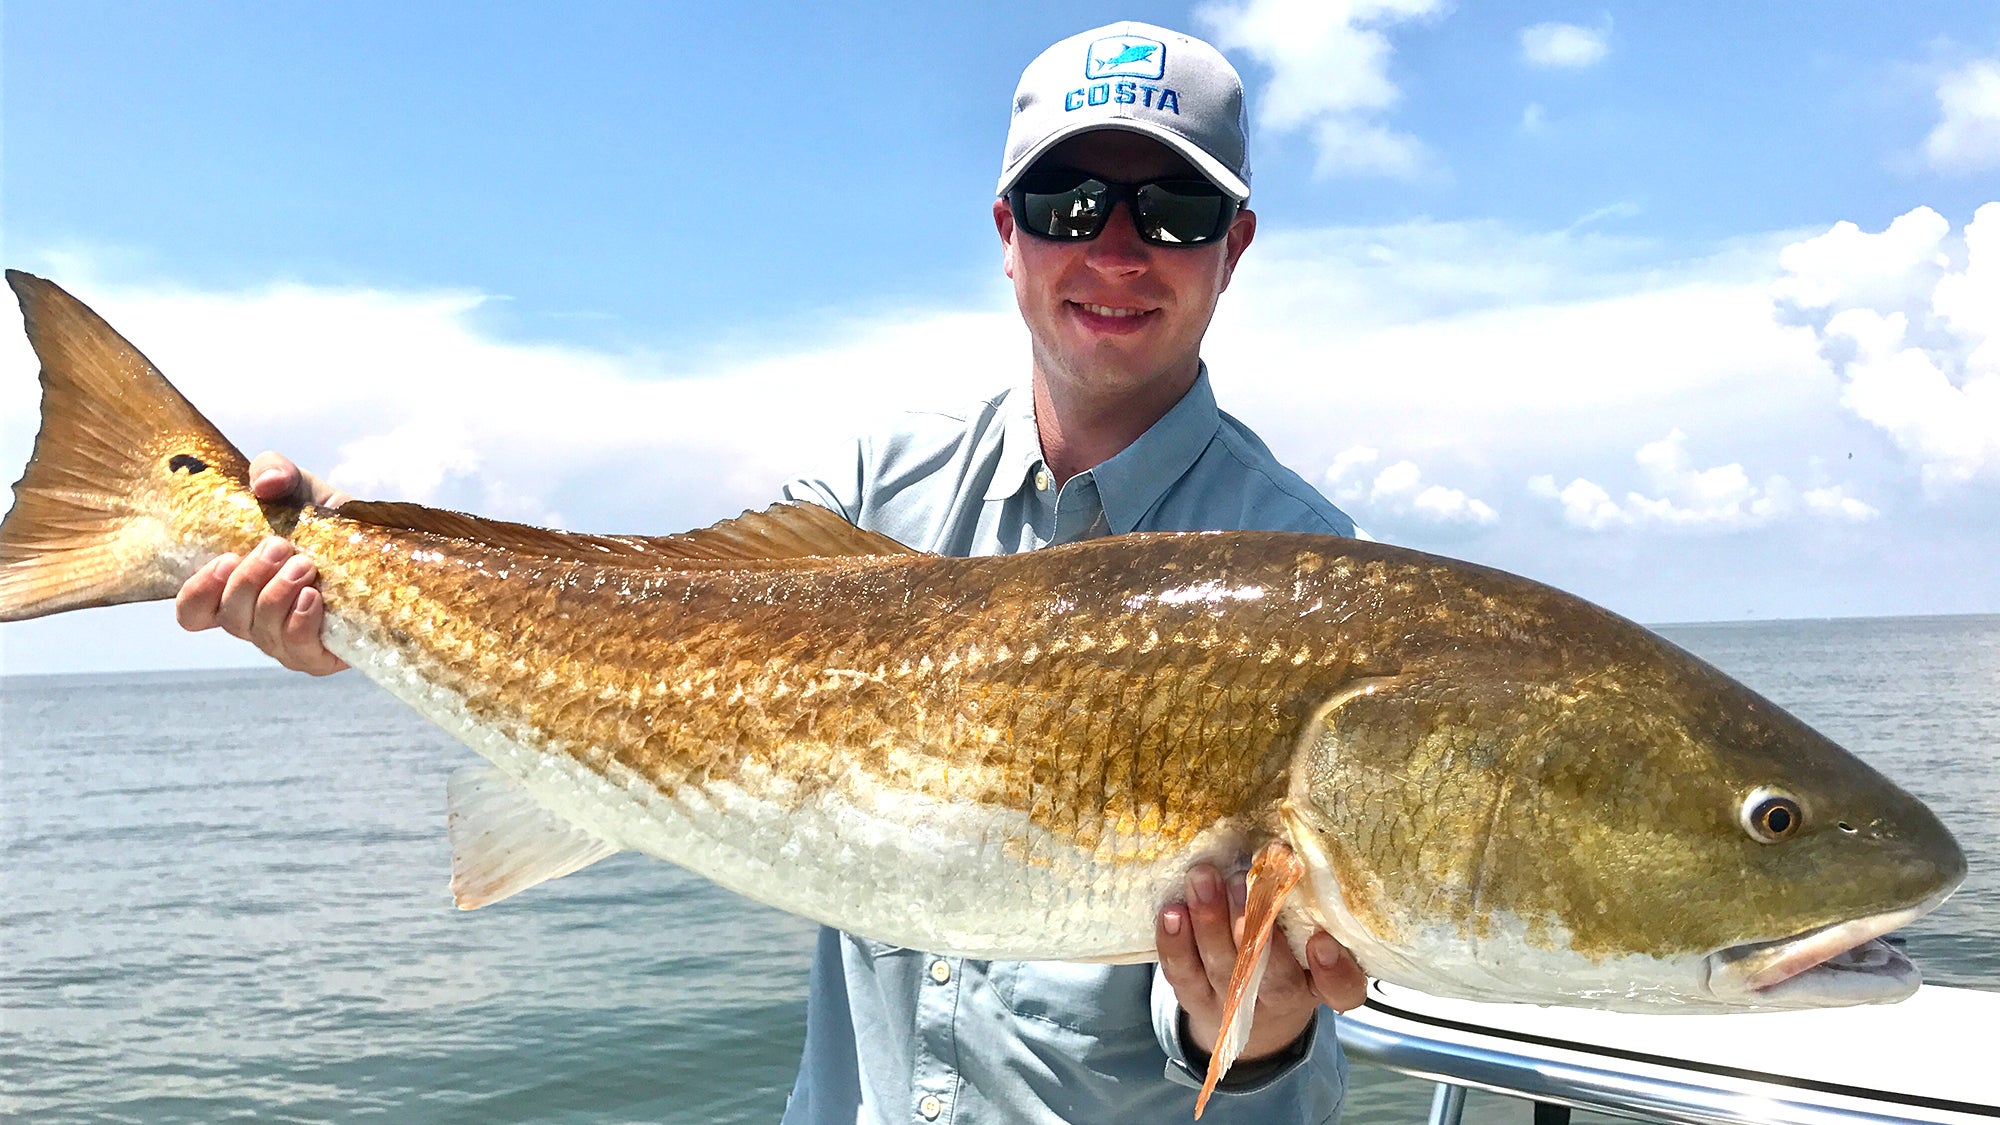 How to Catch Redfish (Redrum): 12 Tips for a Great Fishing Trip